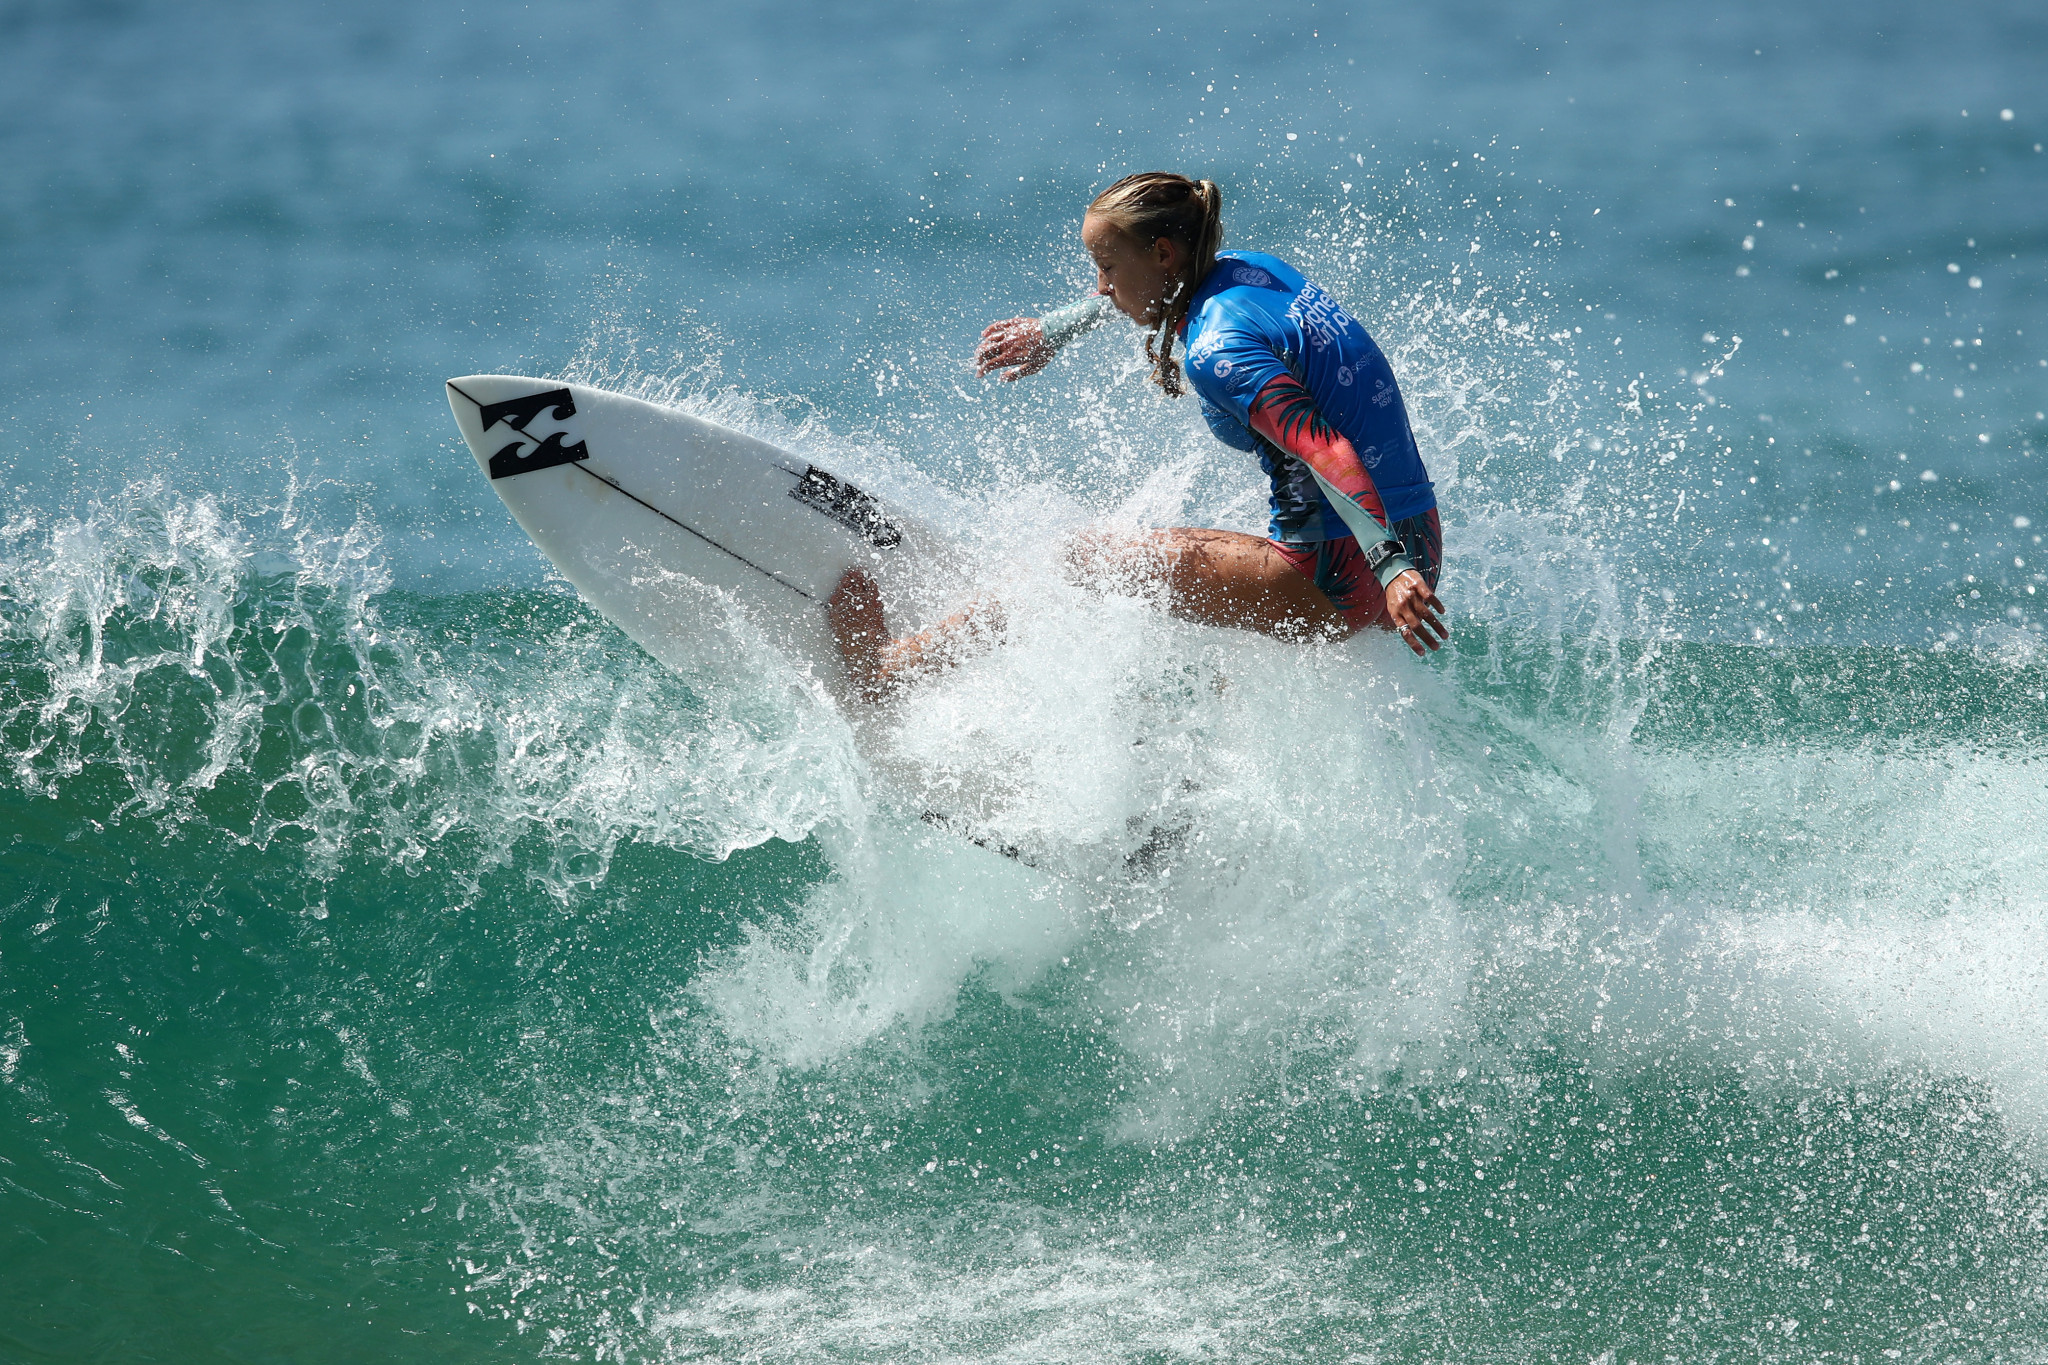 Australia's Isabella Nichols needed to win the Margaret River WSL Championship Tour event to make the mid-season cut ©Getty Images